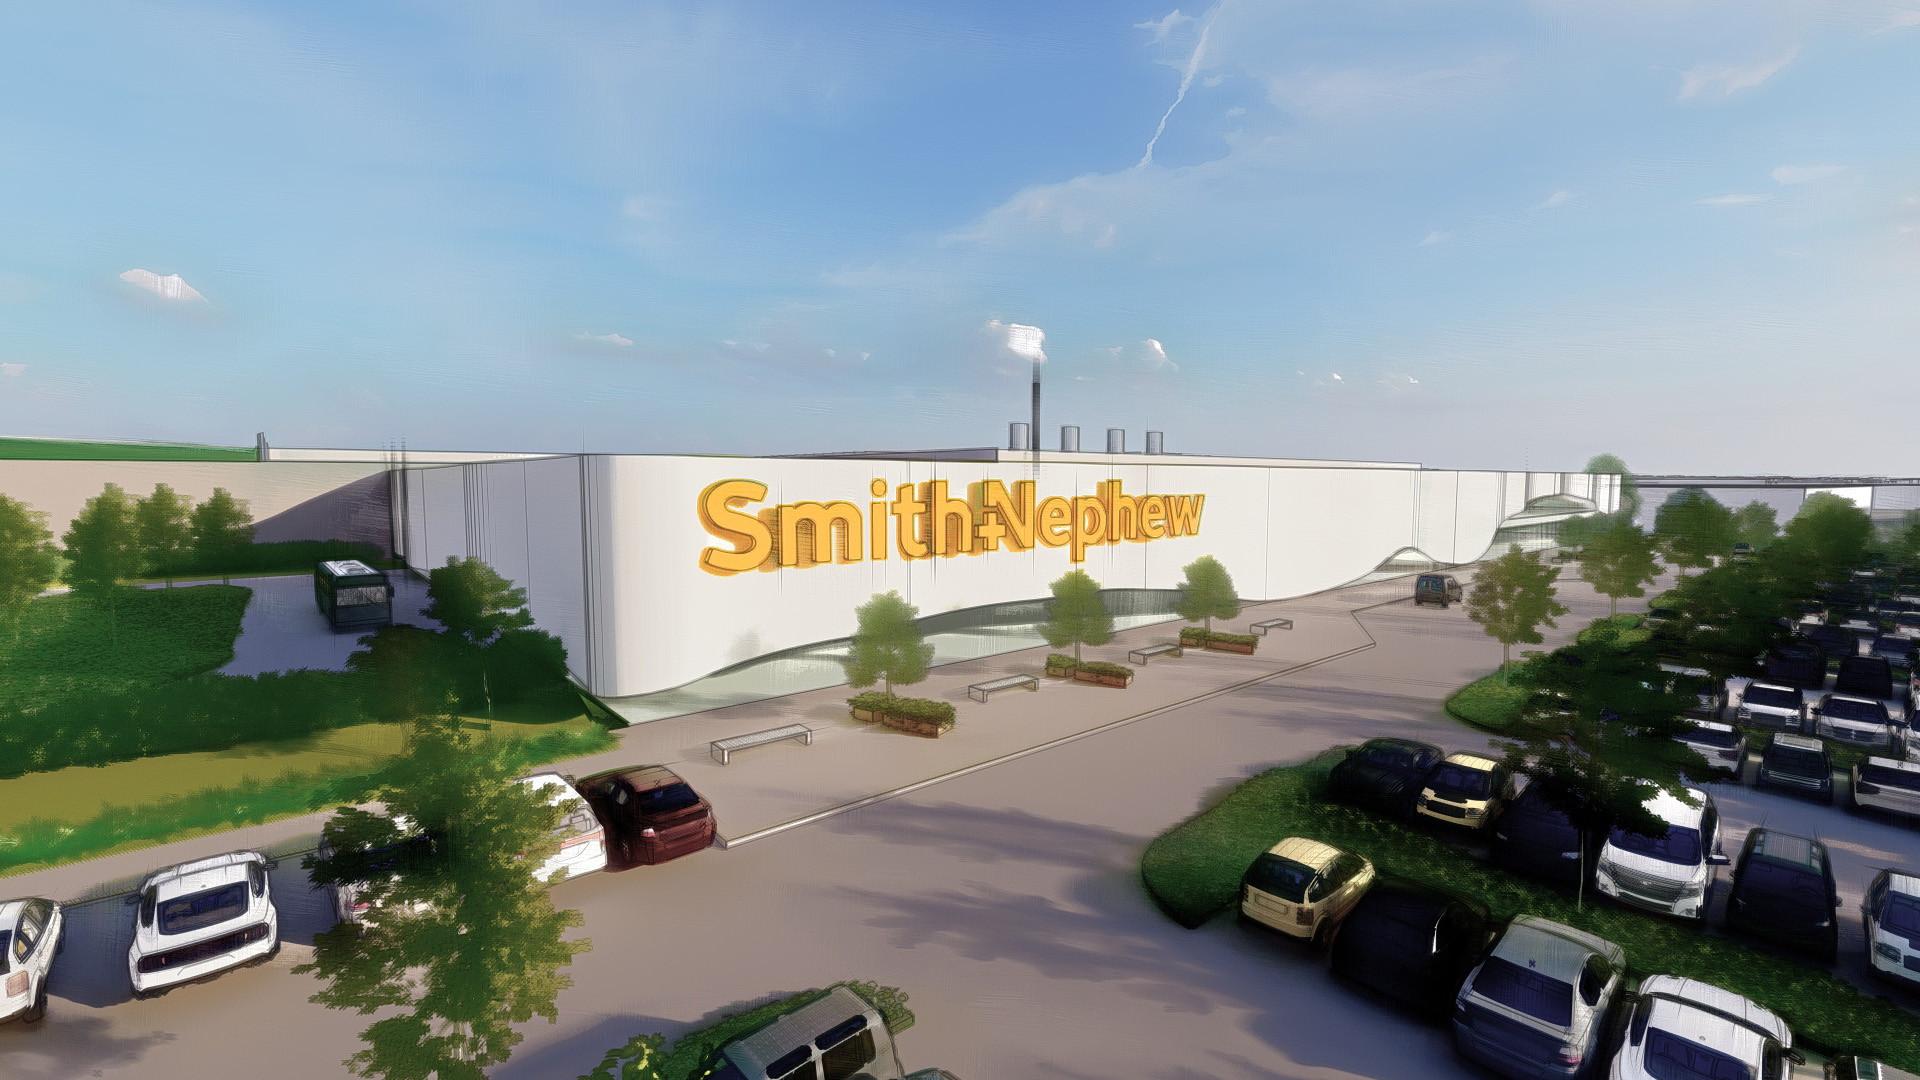 Smith+Nephew announces new UK R&D and manufacturing facility for Advanced Wound Management with $100m+ investment near Hull